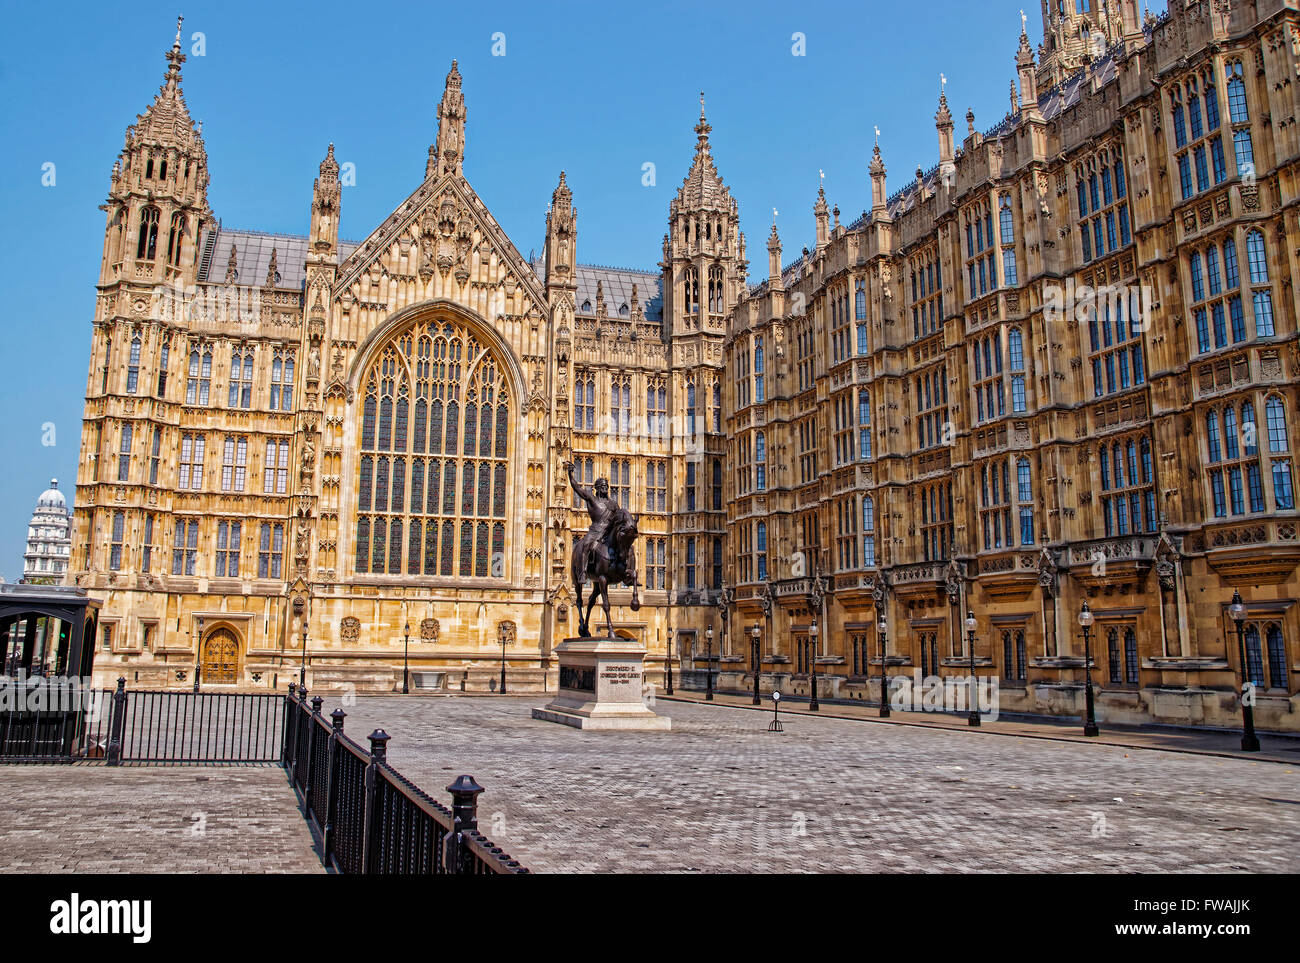 King monument in Old Palace Yard at the Palace of Westminster in London, the UK. The Westminster Palace is a meeting place for the two houses of the Parliament of the United Kingdom. Stock Photo